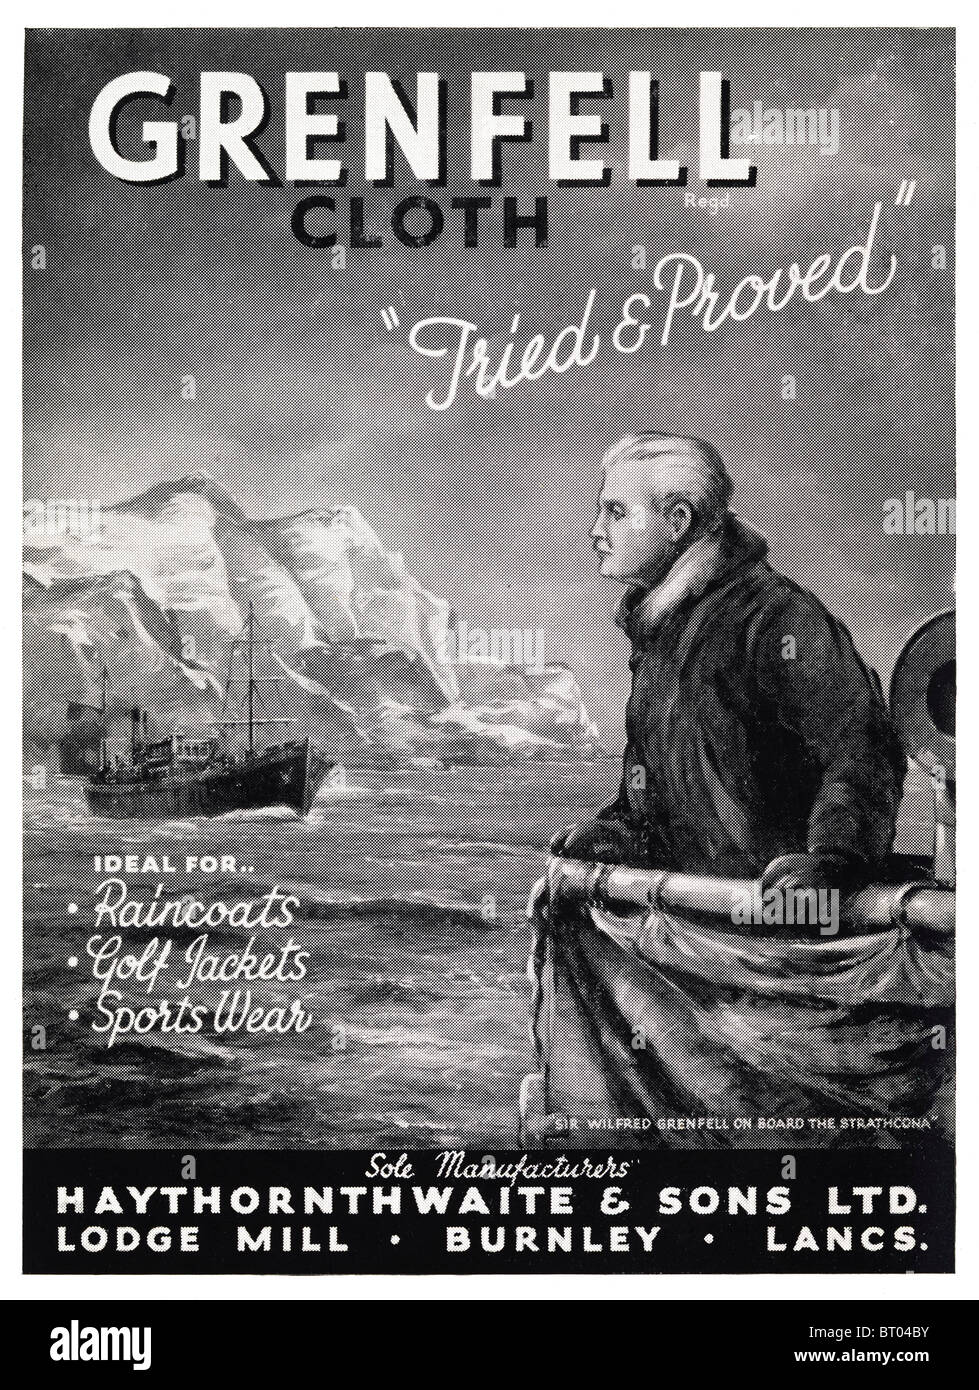 Advert for Grenfell Cloth in the magazine Mountaineering published by The British Mountaineering Council circa 1948 Stock Photo